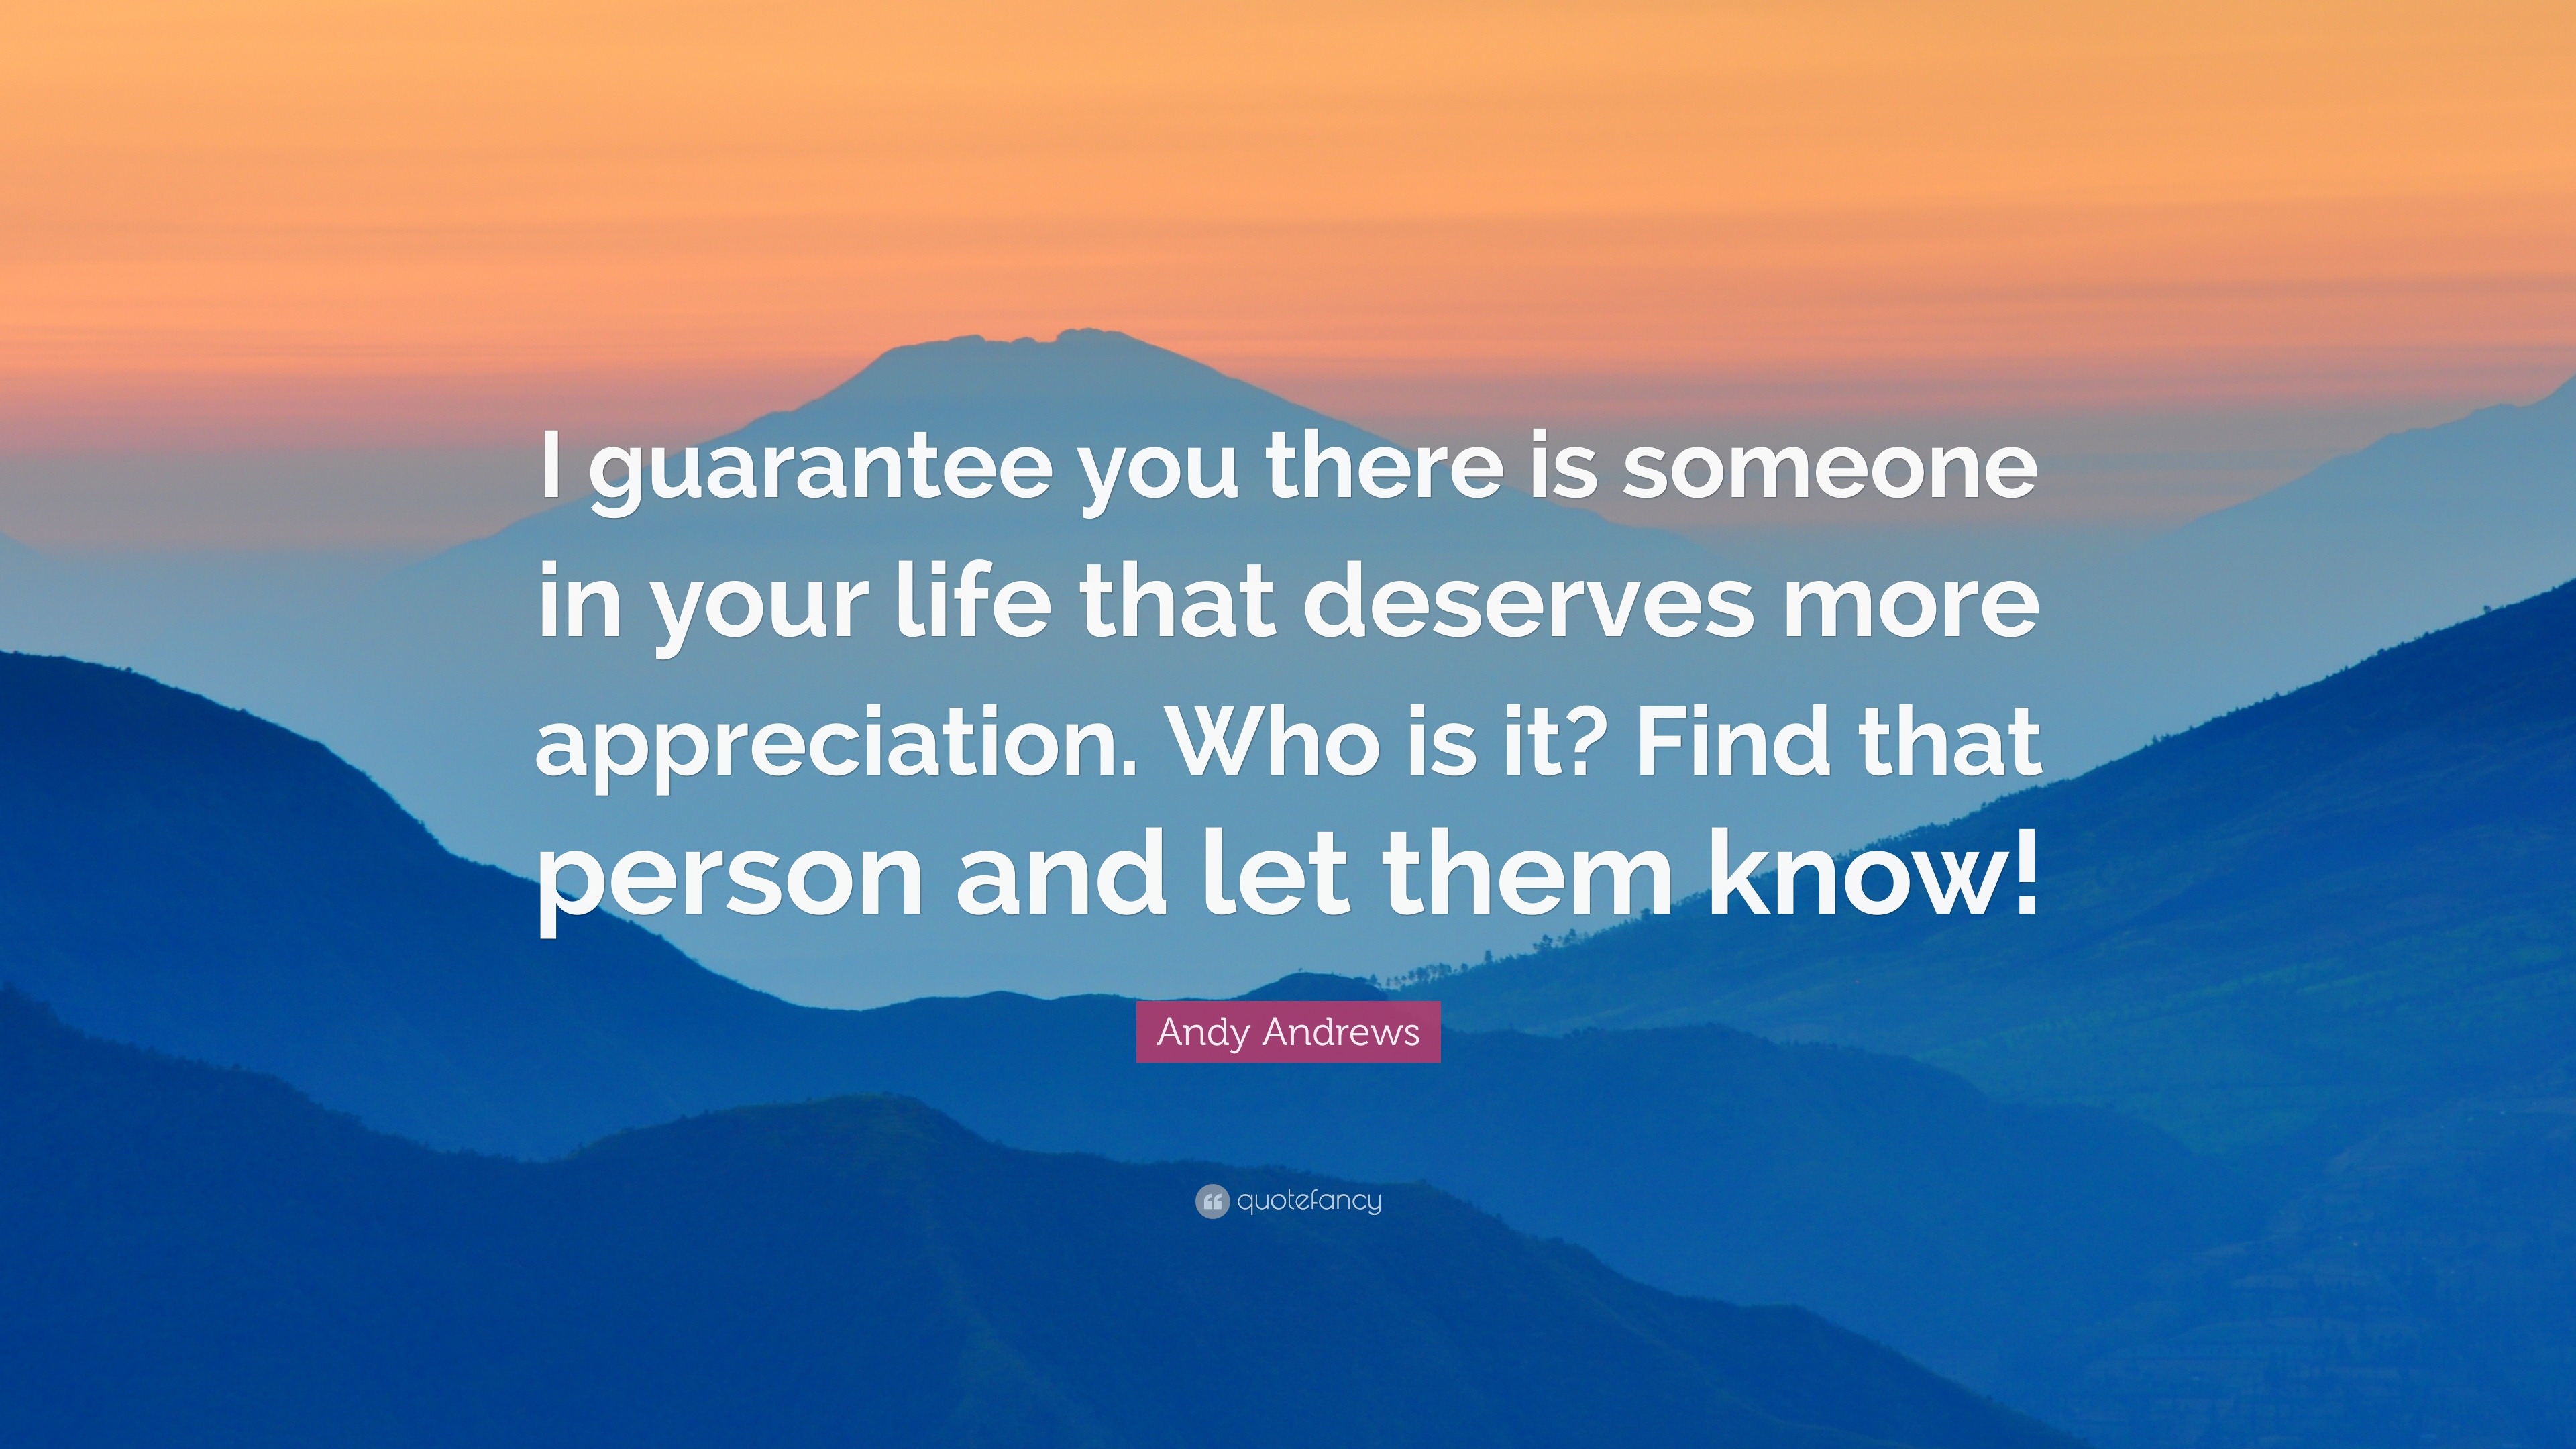 Andy Andrews Quote “I guarantee you there is someone in your life that deserves